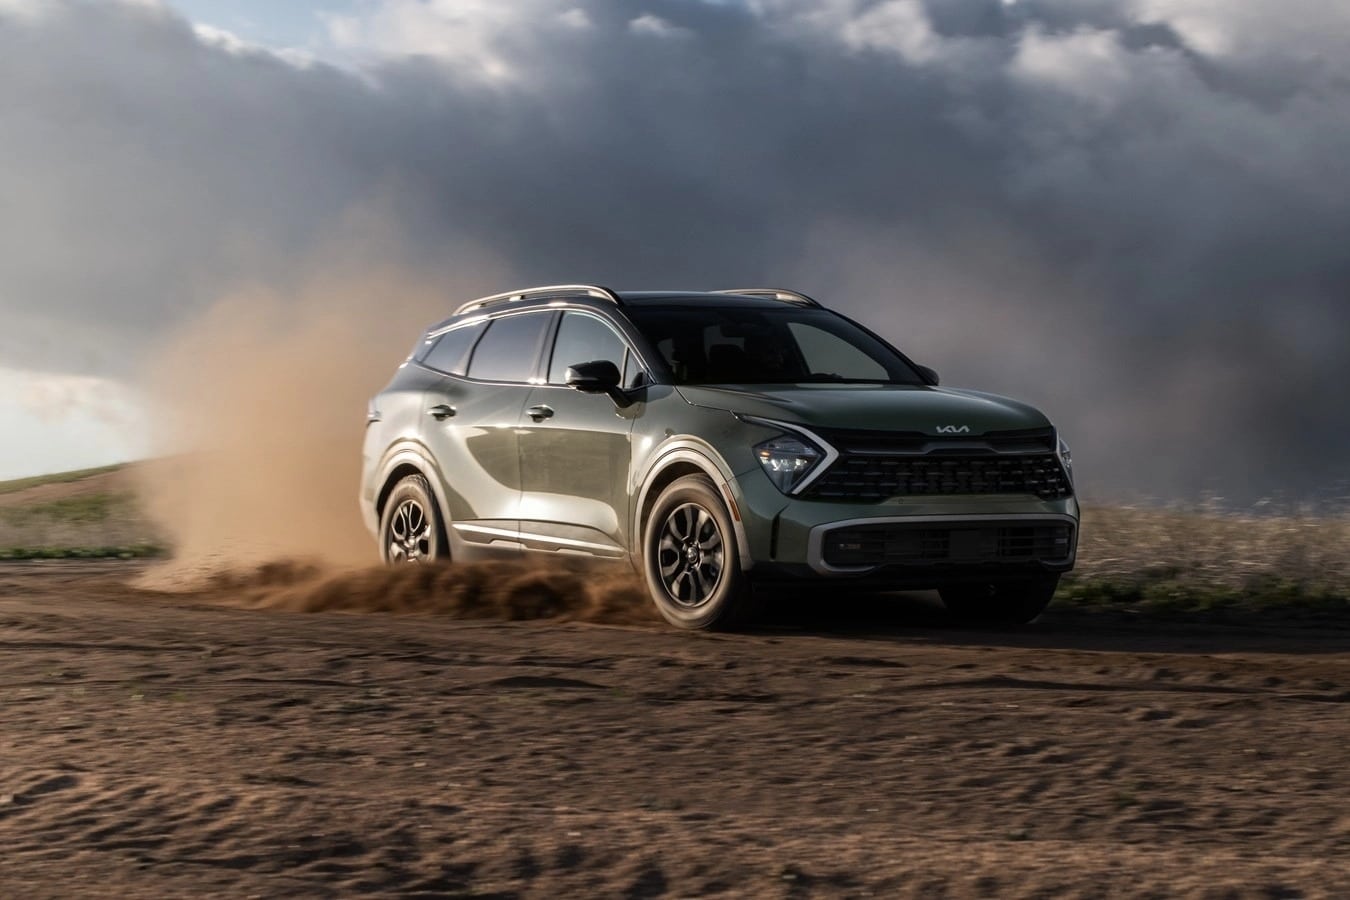 A Kia Sportage X driving across a desert area, throwing sand and clouds of dirt into the air.